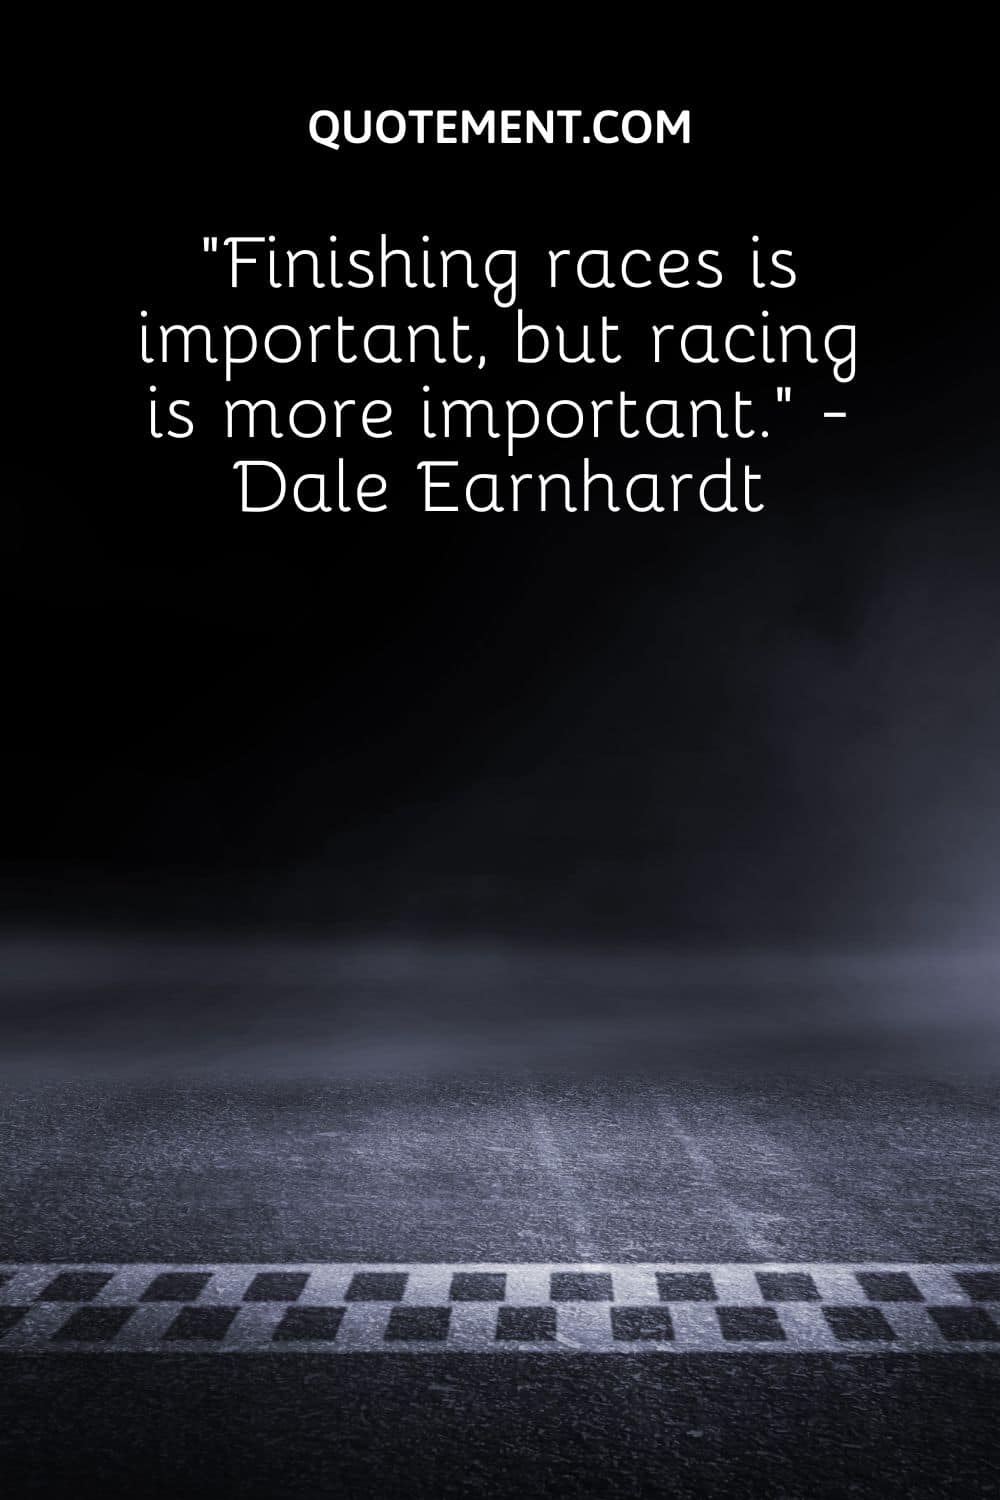 Finishing races is important, but racing is more important